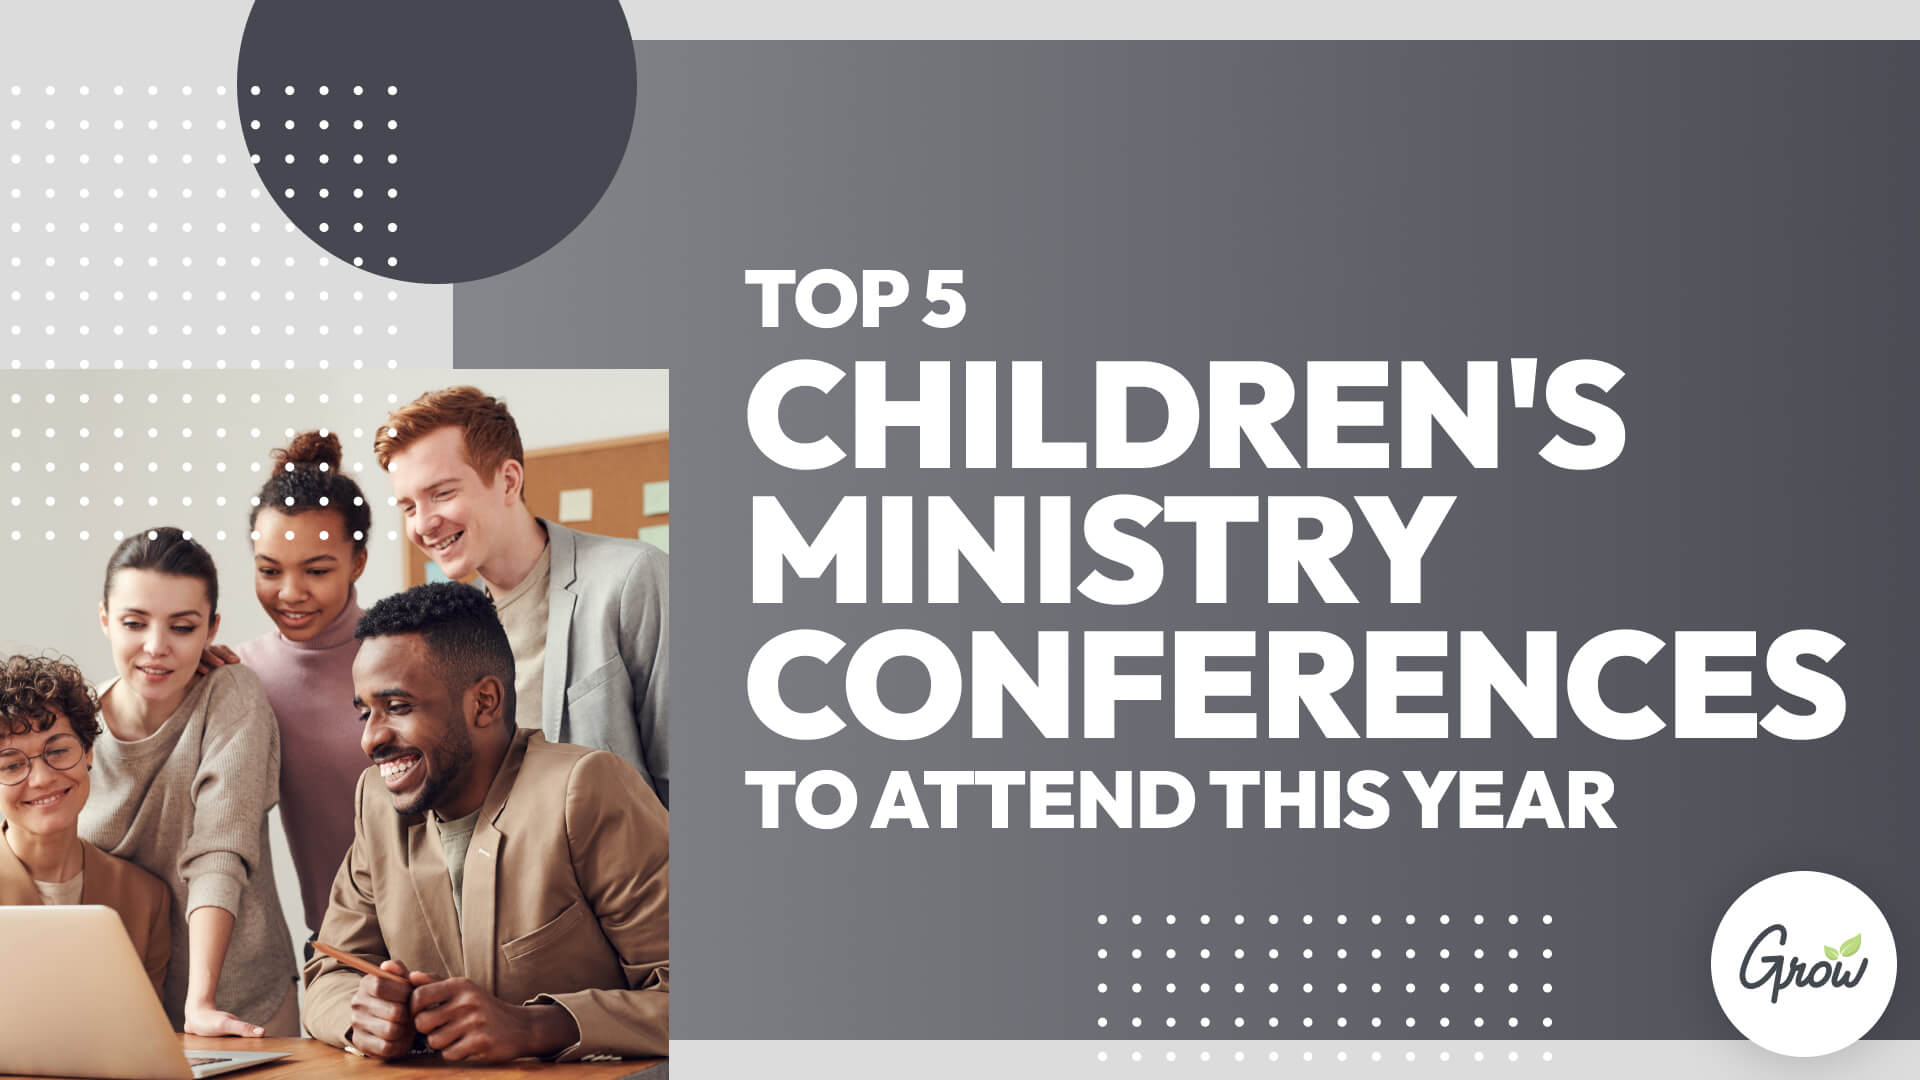 Top 5 Children's Ministry Conferences to Attend This Year